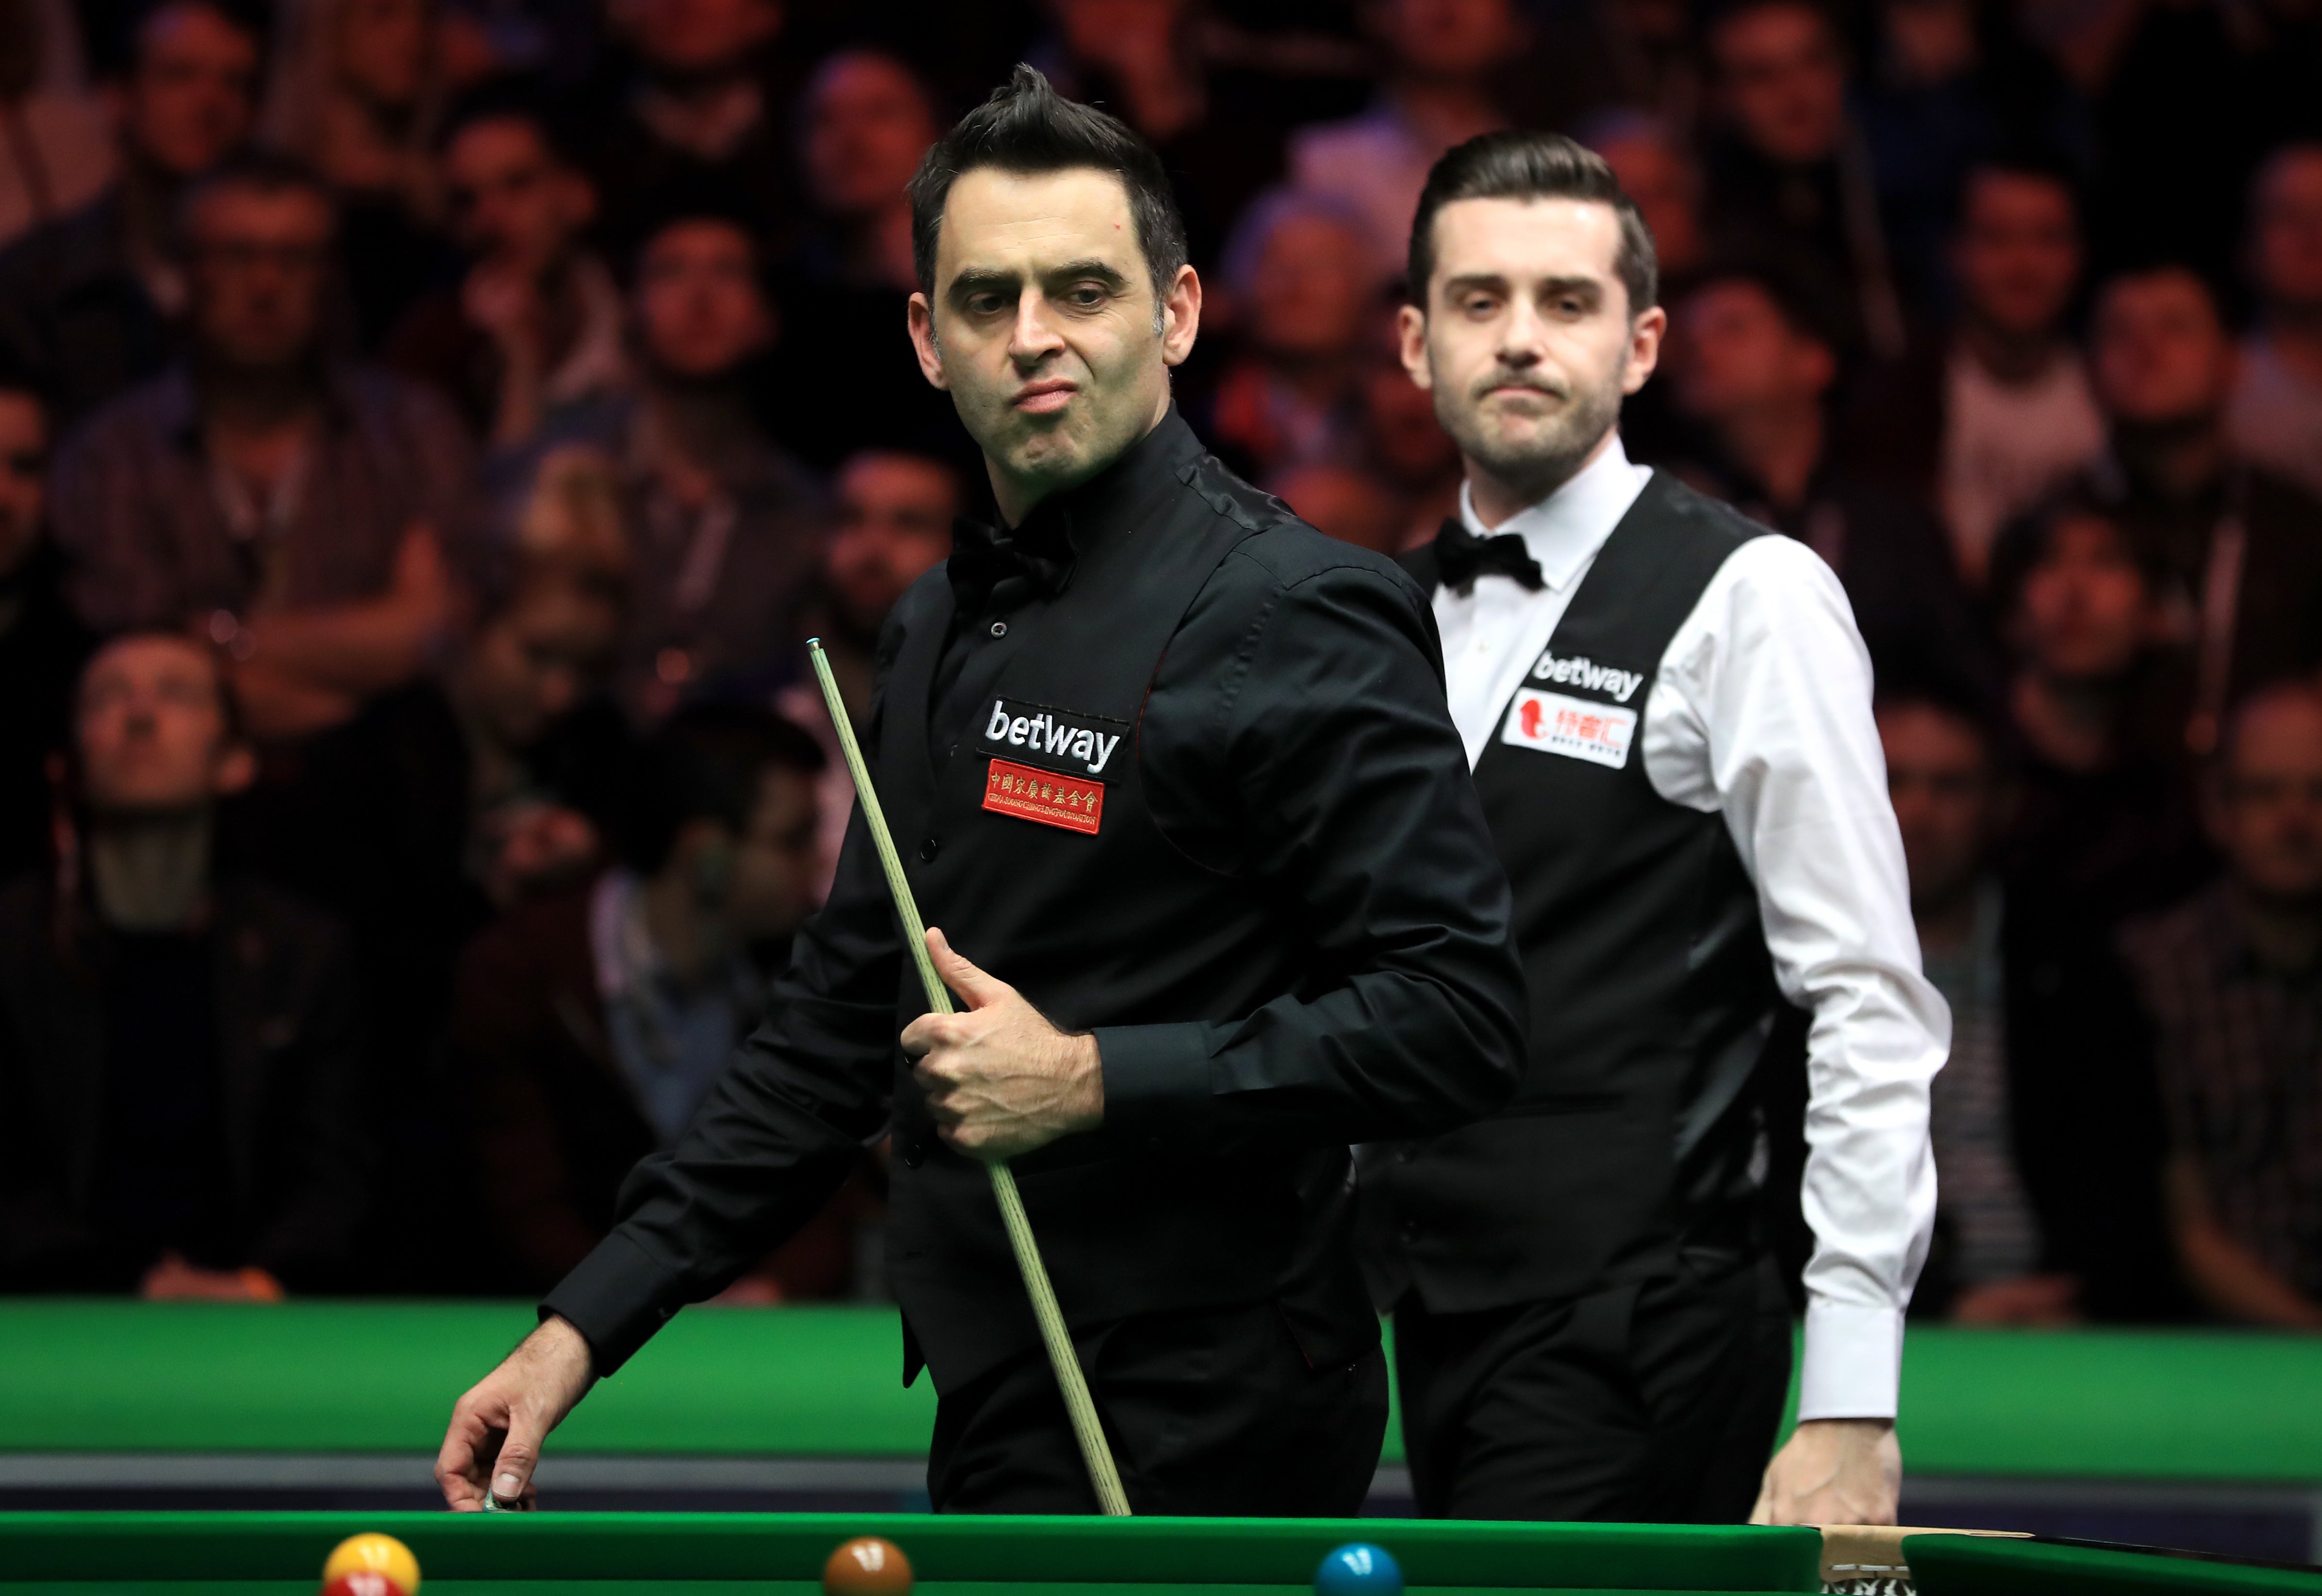 Mixed doubles snooker event to take place in Milton Keynes in September The Independent